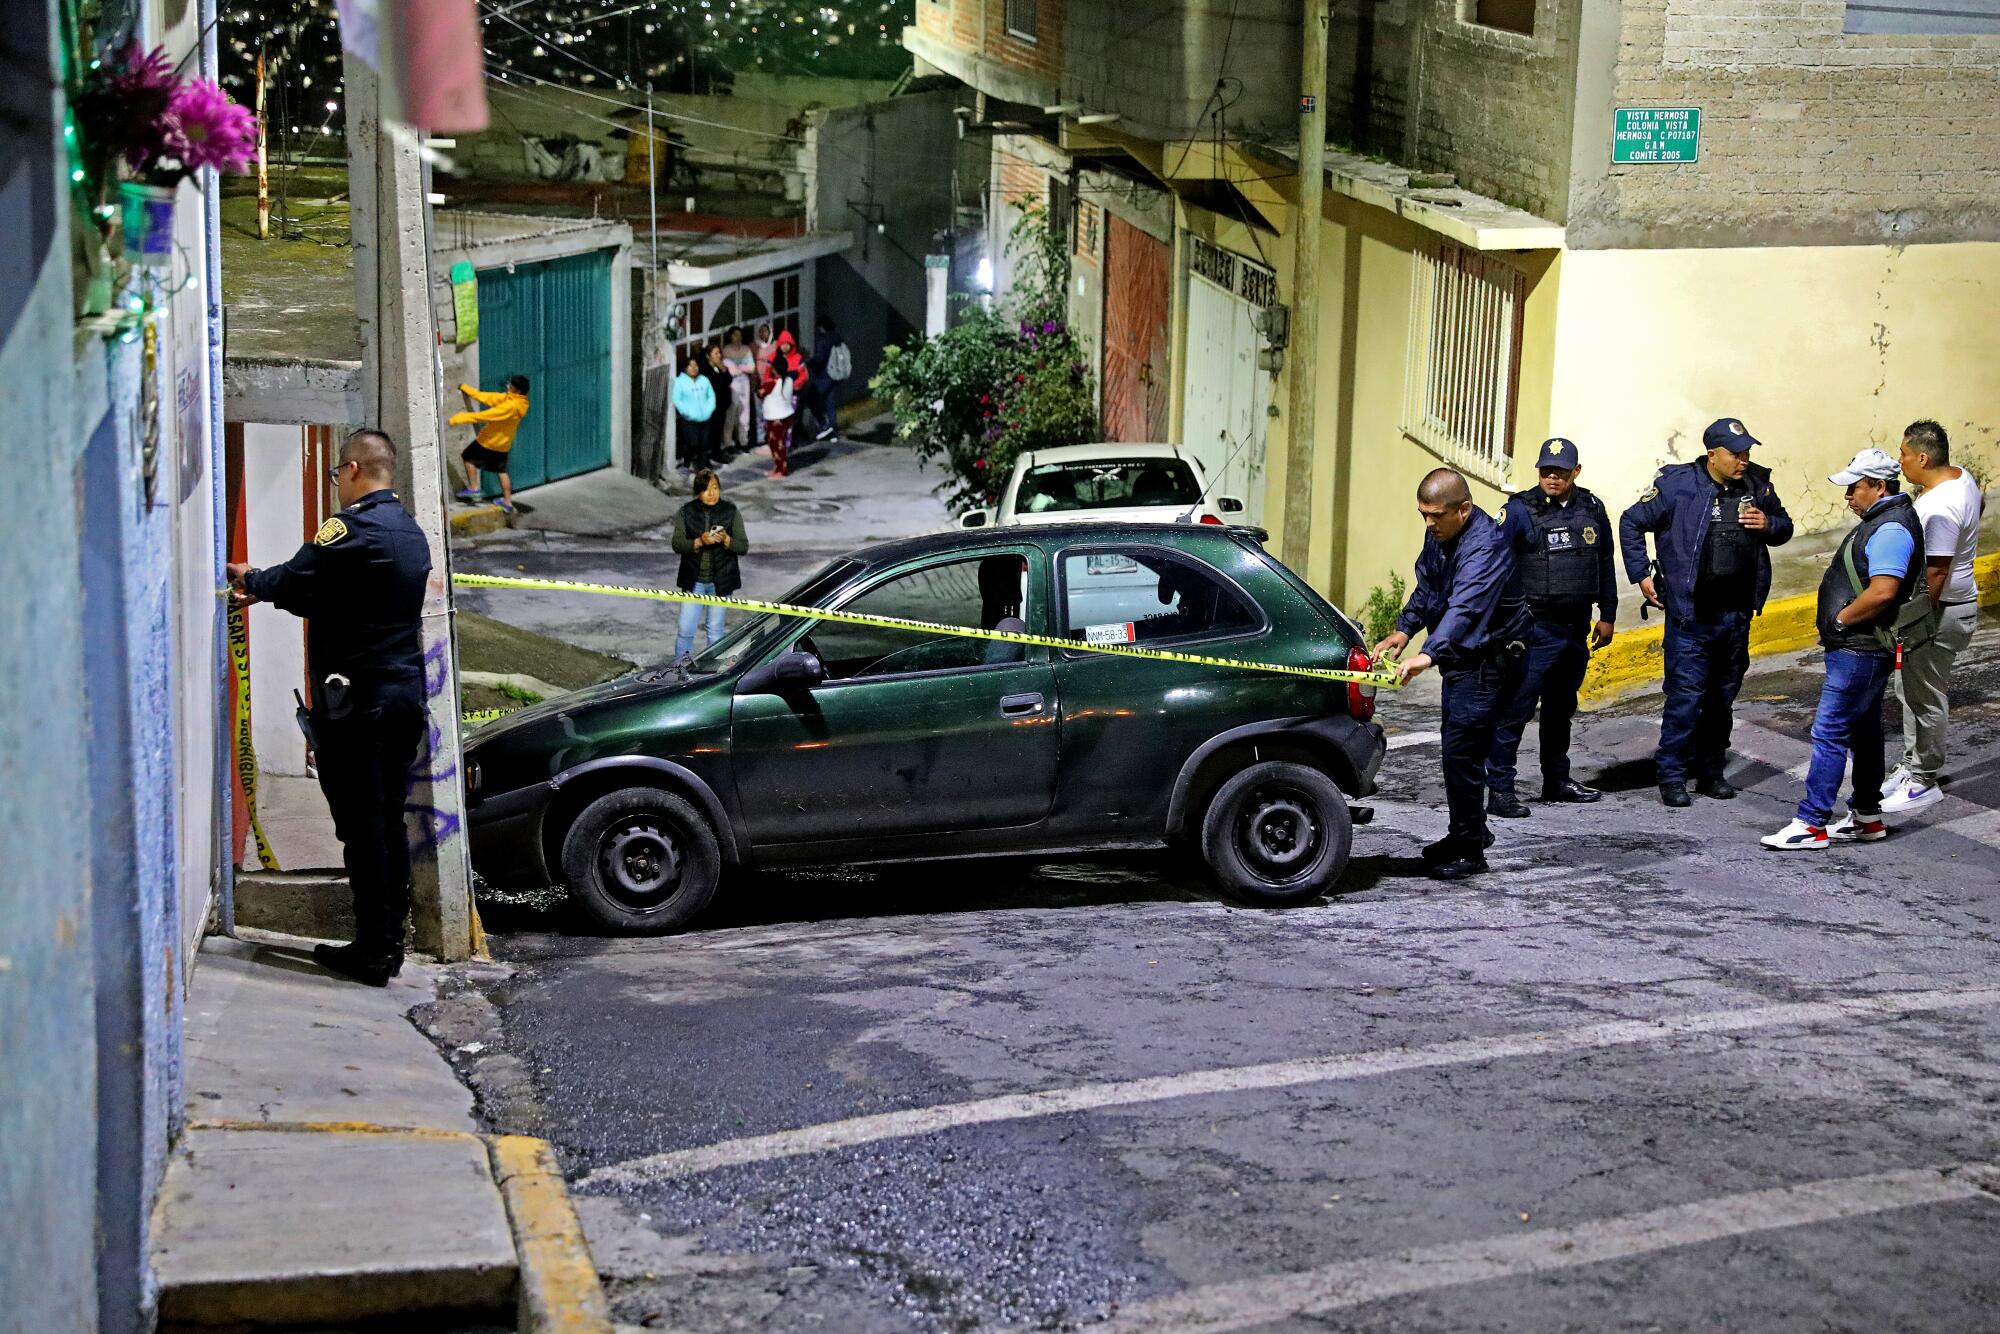 Mexico City police officers conduct an investigation where a male taxi driver was killed.